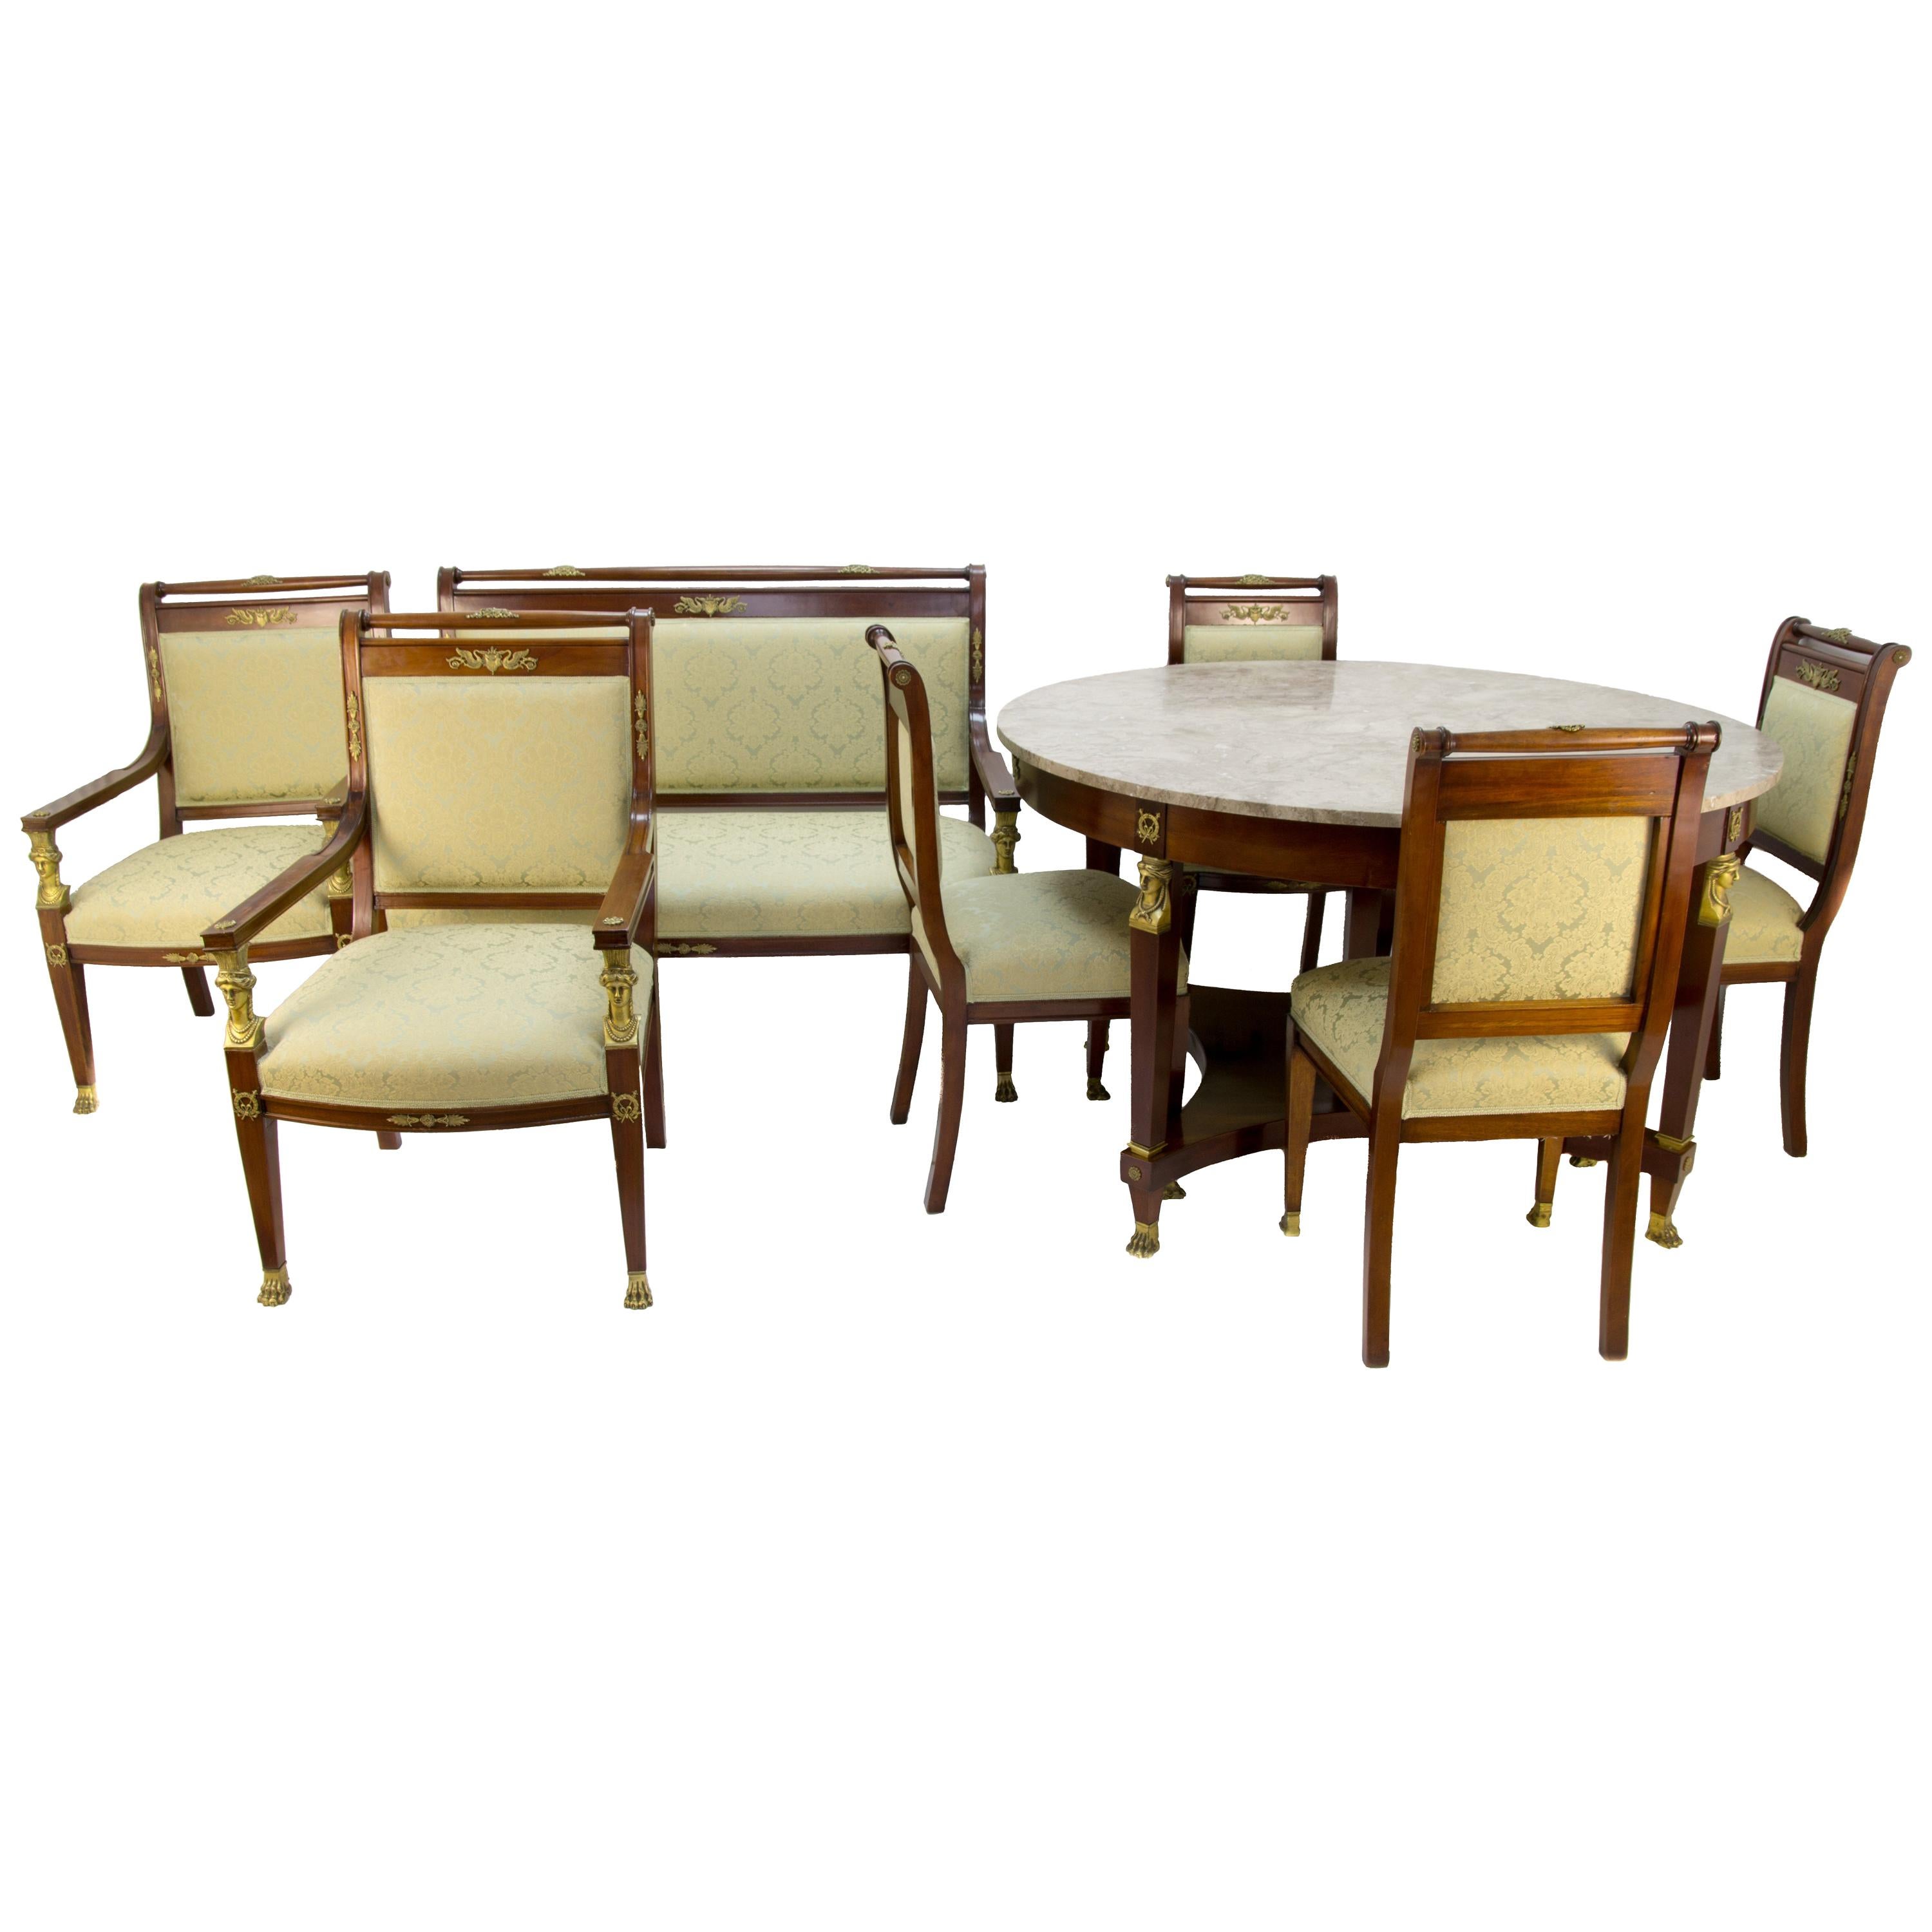 French Empire Style Walnut, Bronze, and Marble Table and Chairs Living Room Set